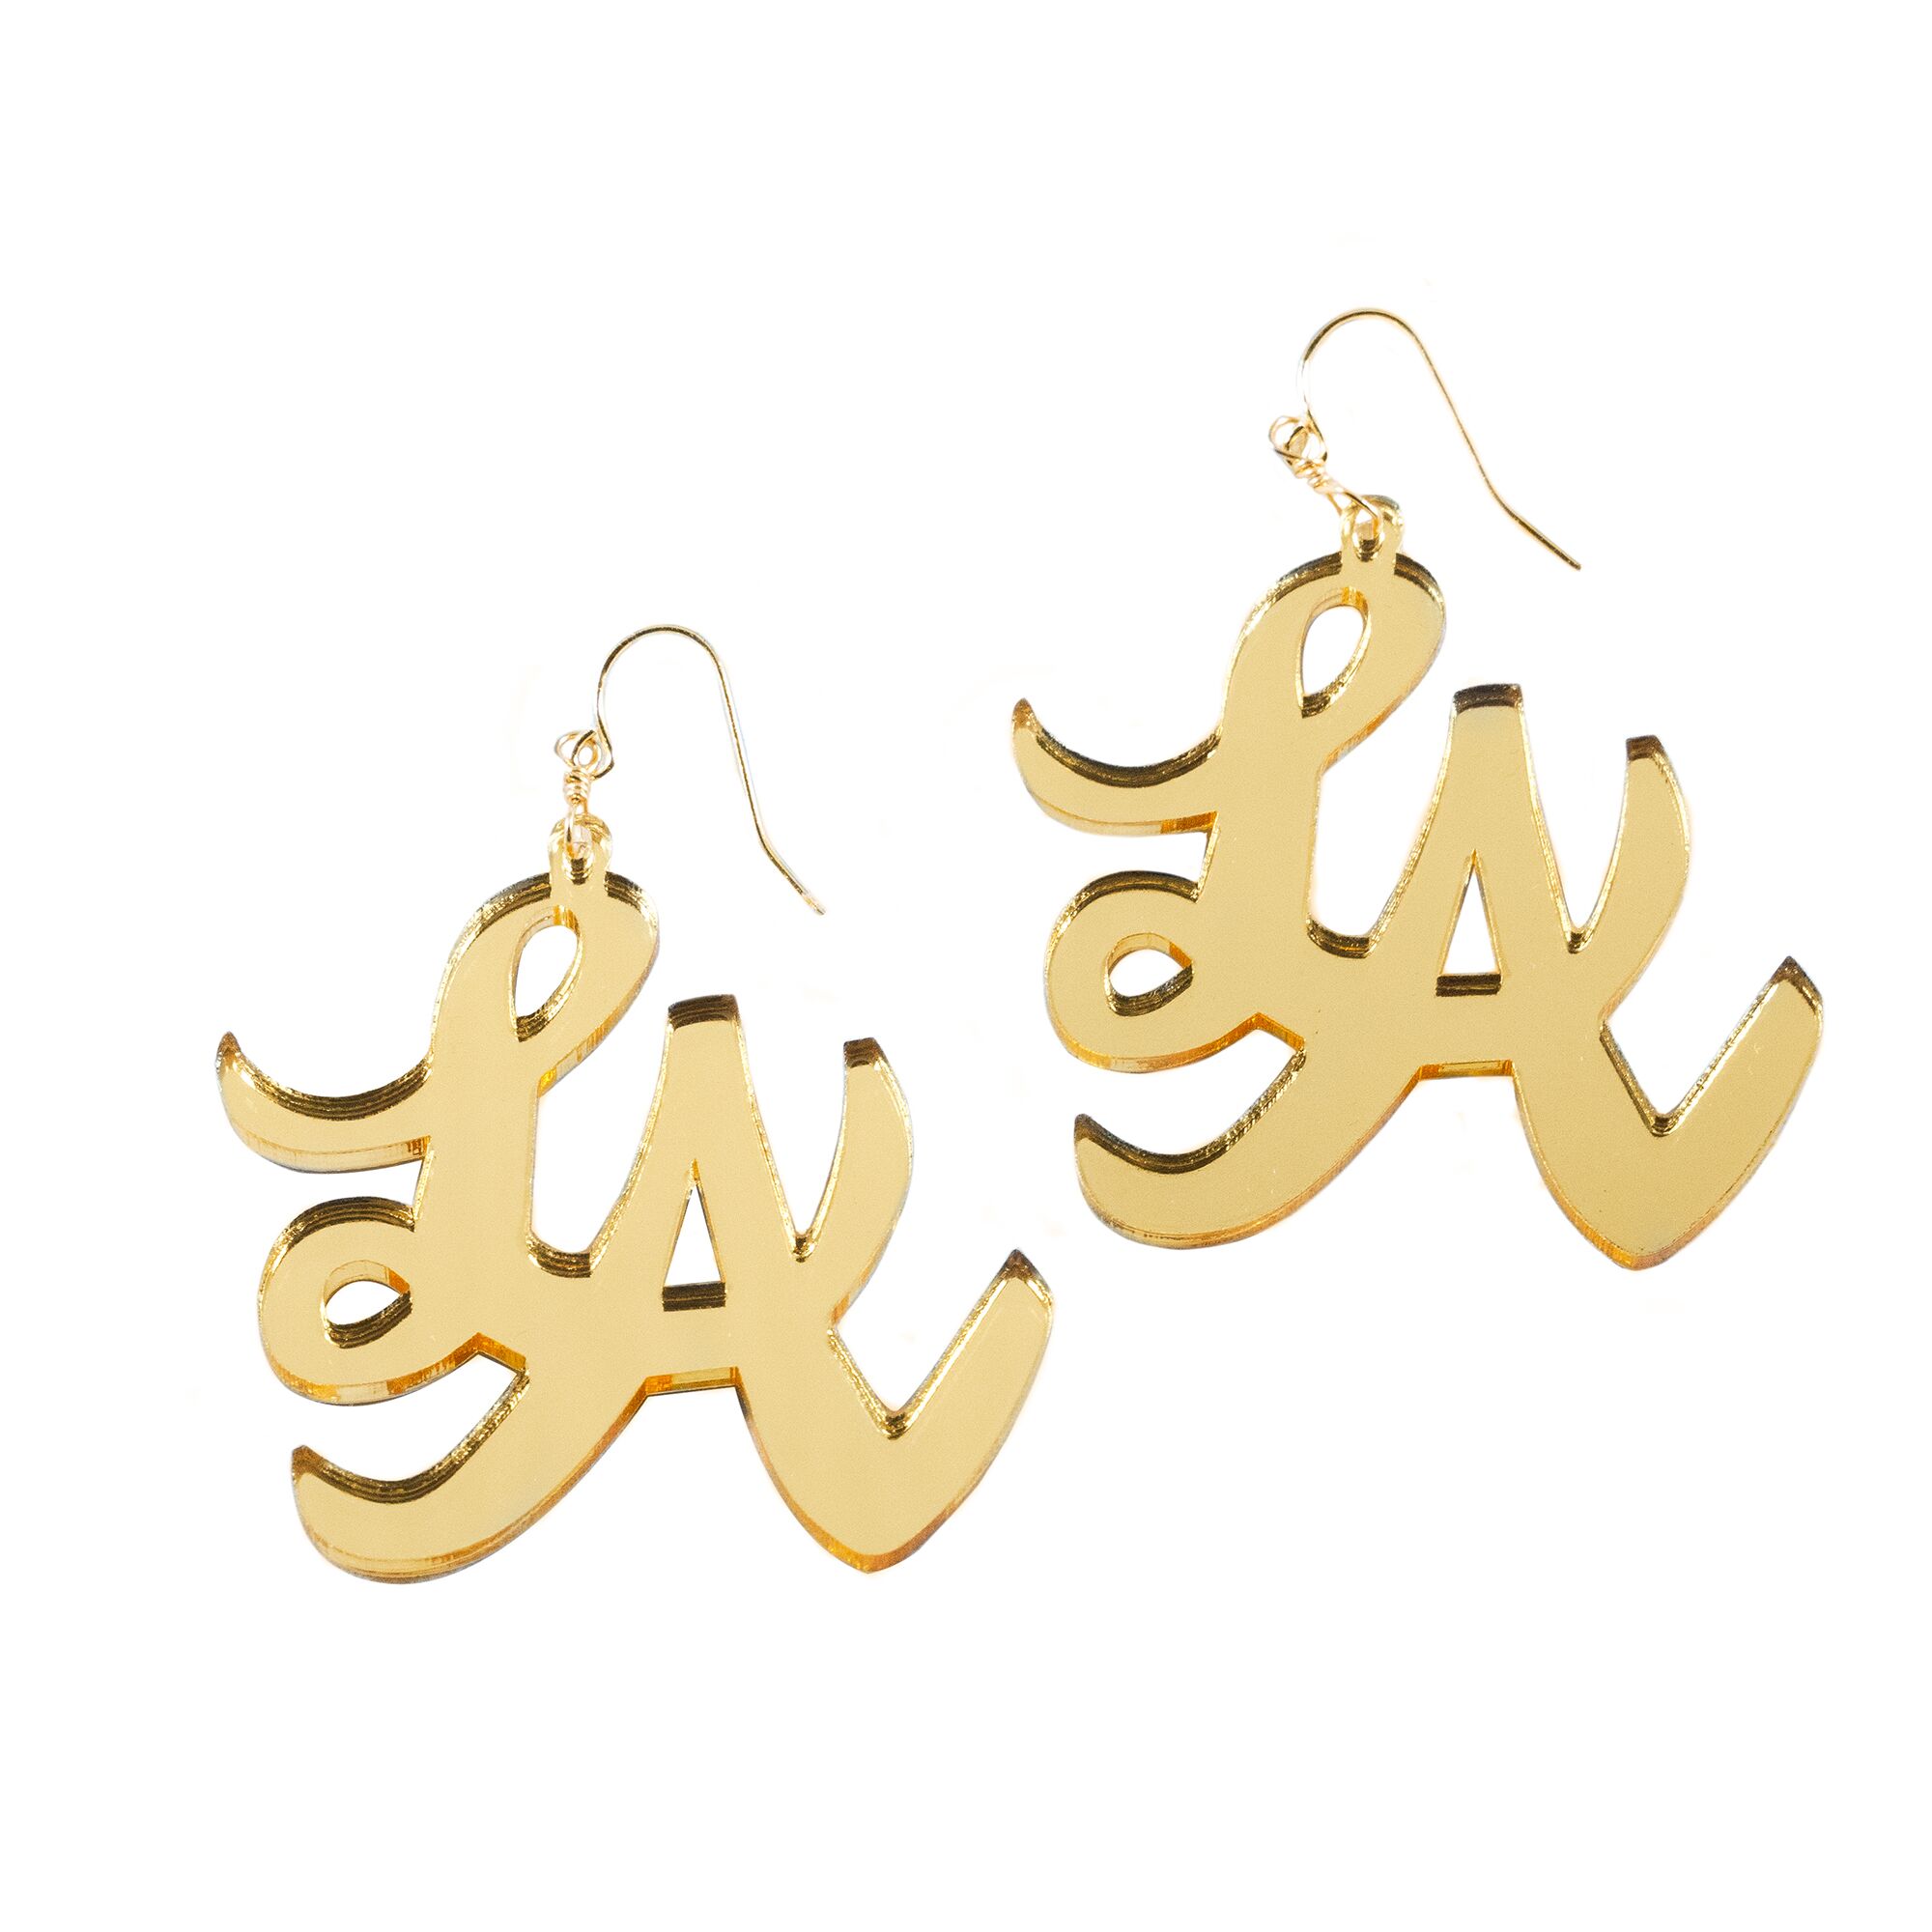 Laser cut mirrored acrylic earrings, which are handmade in Highland Park and from the brand Mi Vida. $28